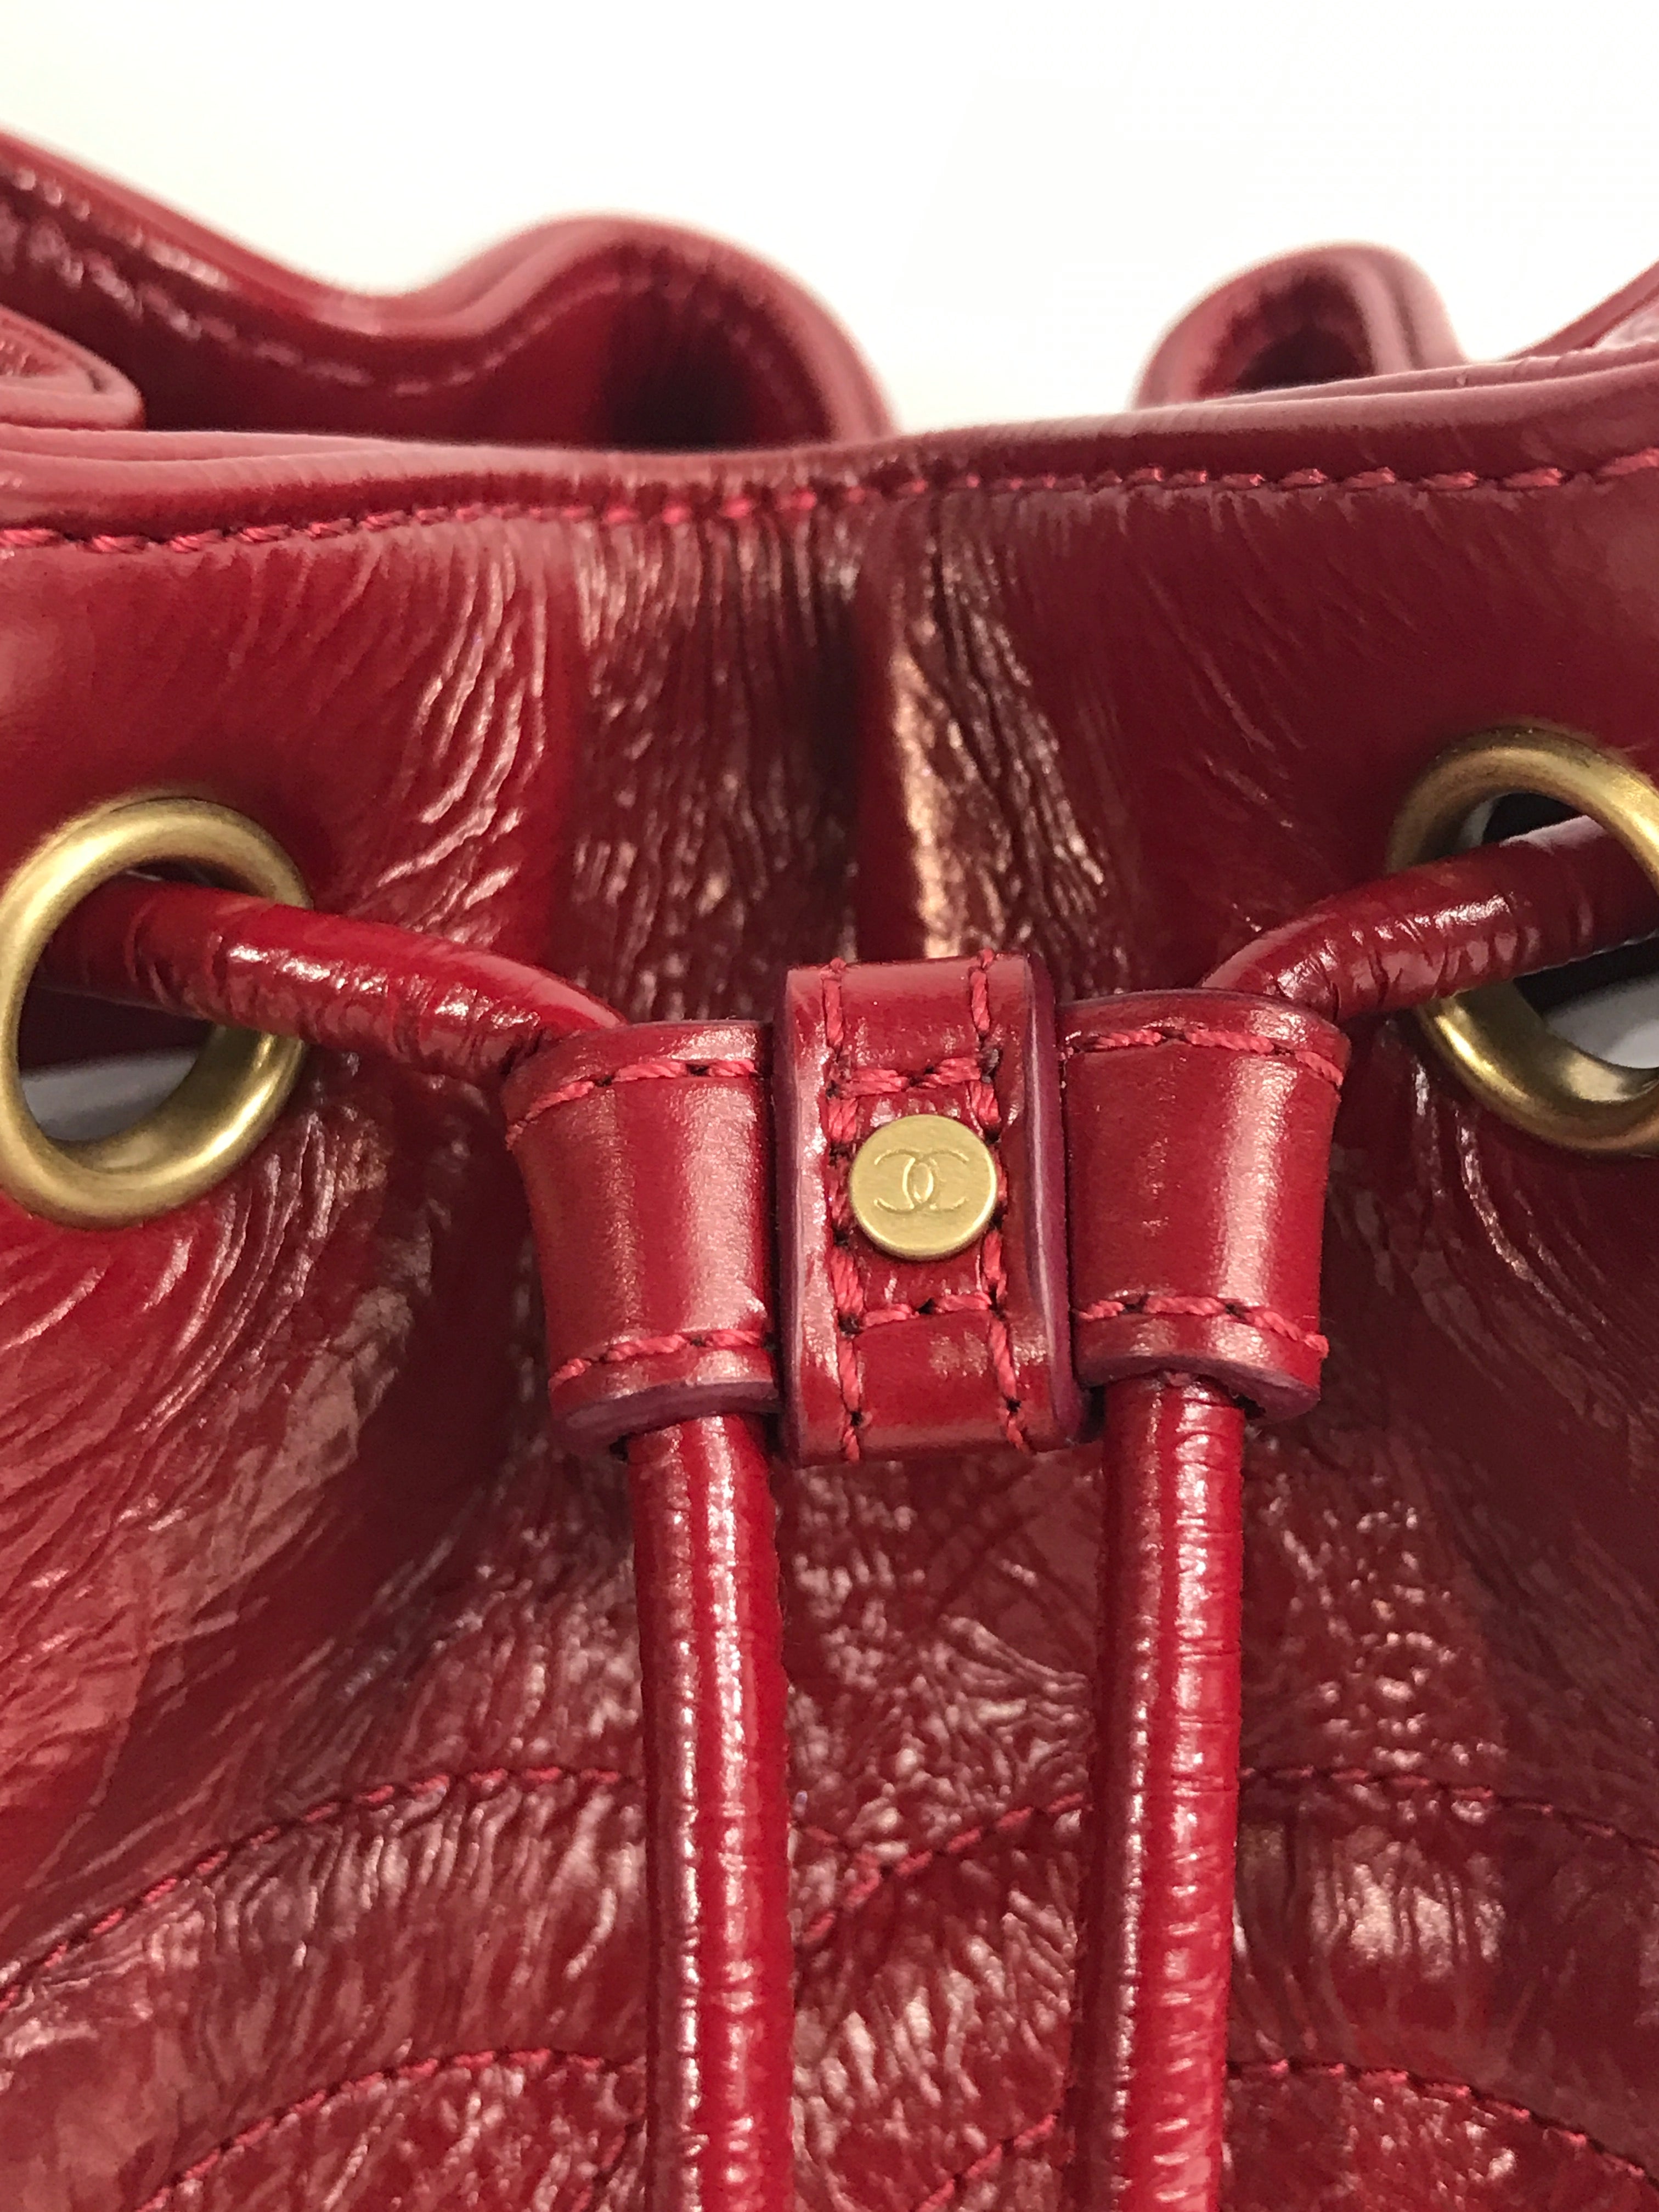 Red Shiny Aged Calfskin Leather Mini Bucket Bag w/AGHW Chain